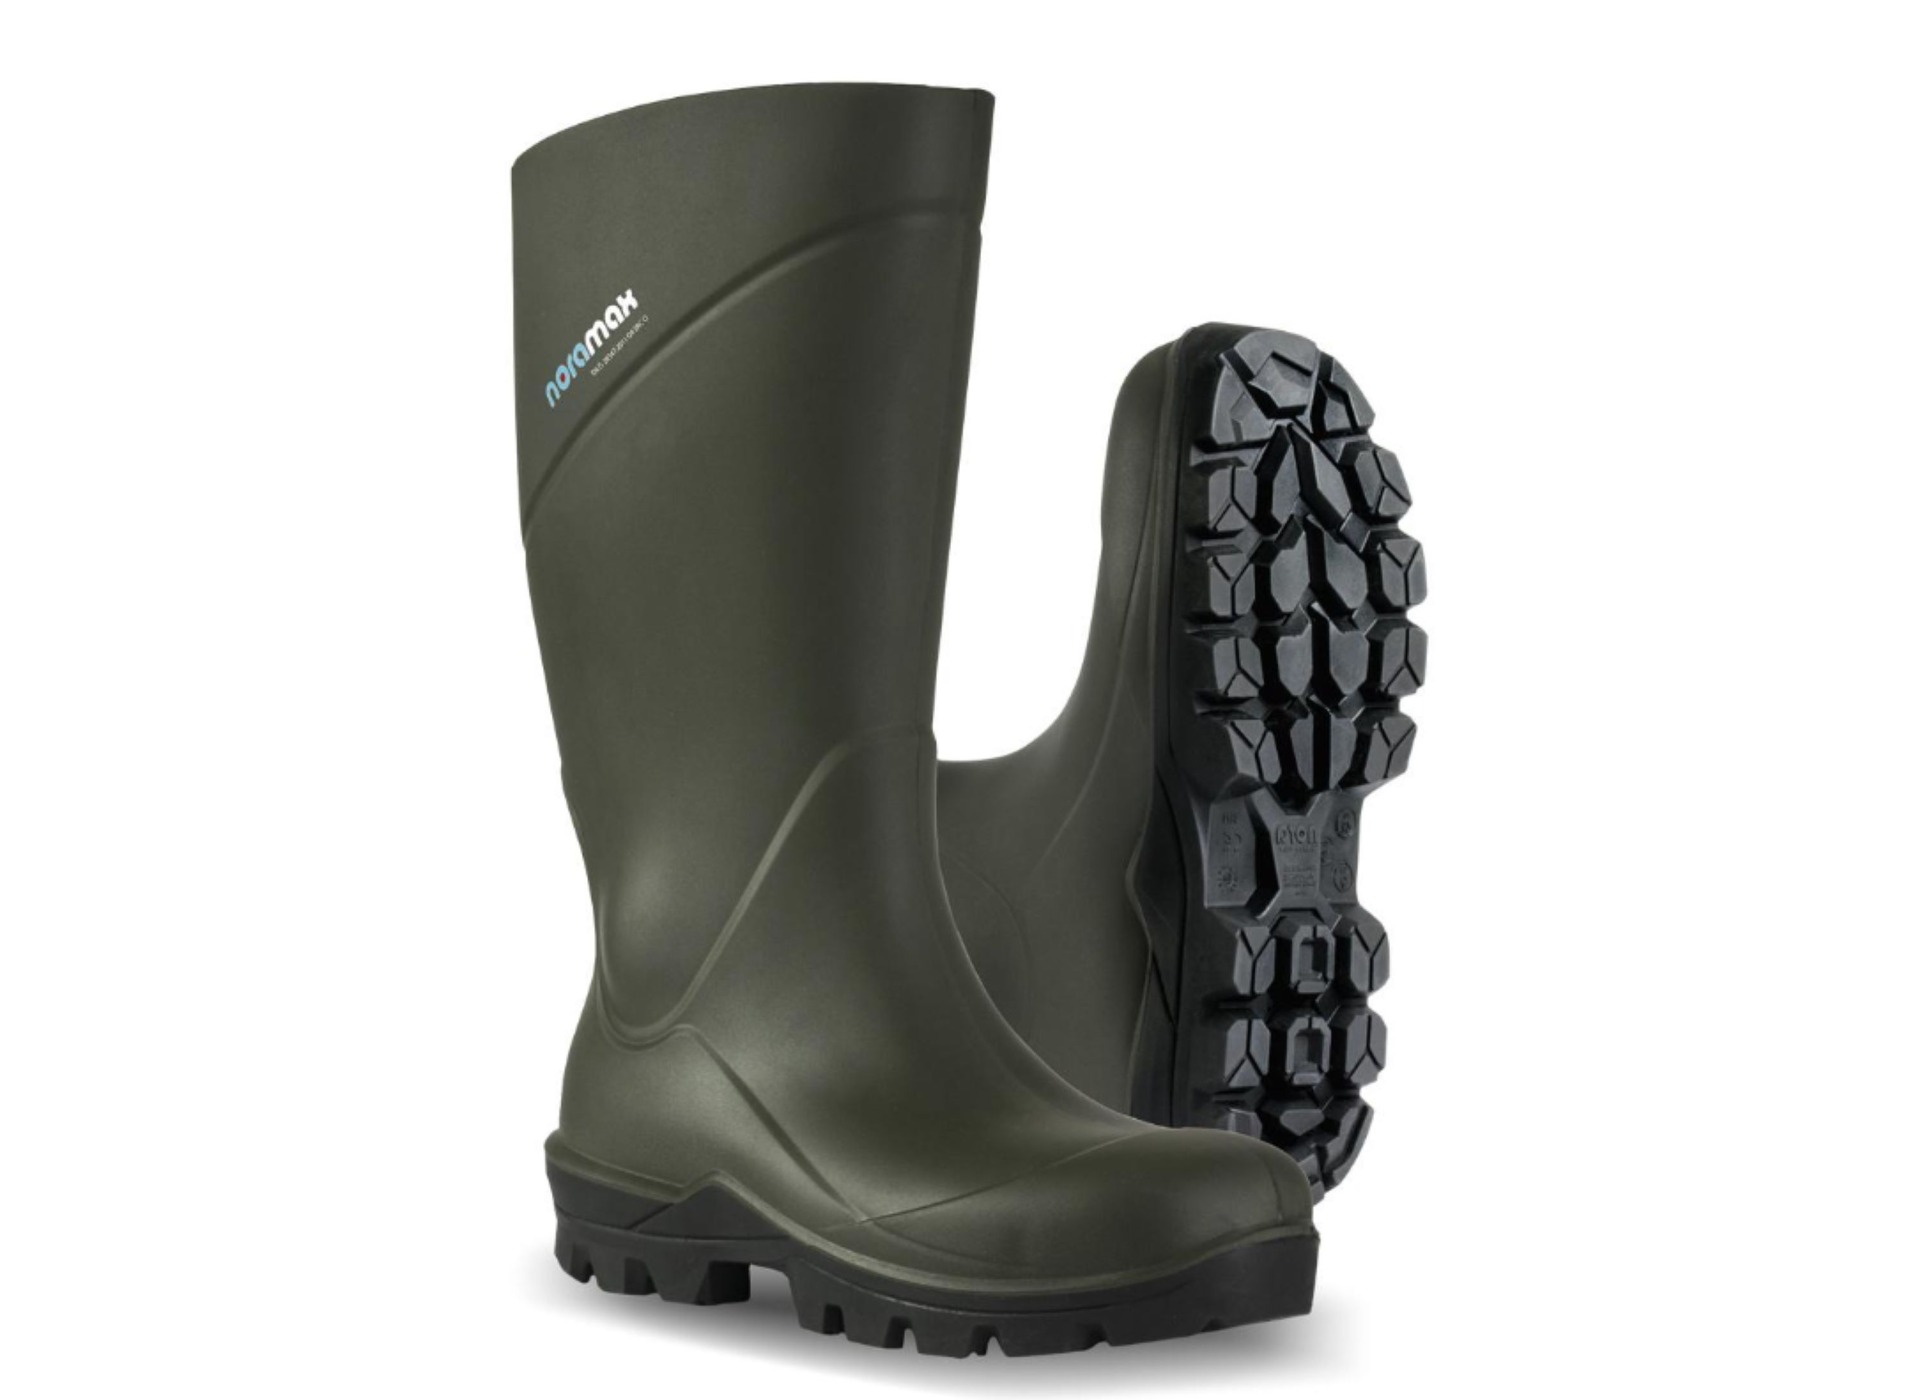 NORAMAX 14"  PU SAFETY BOOT (CSA, SD)